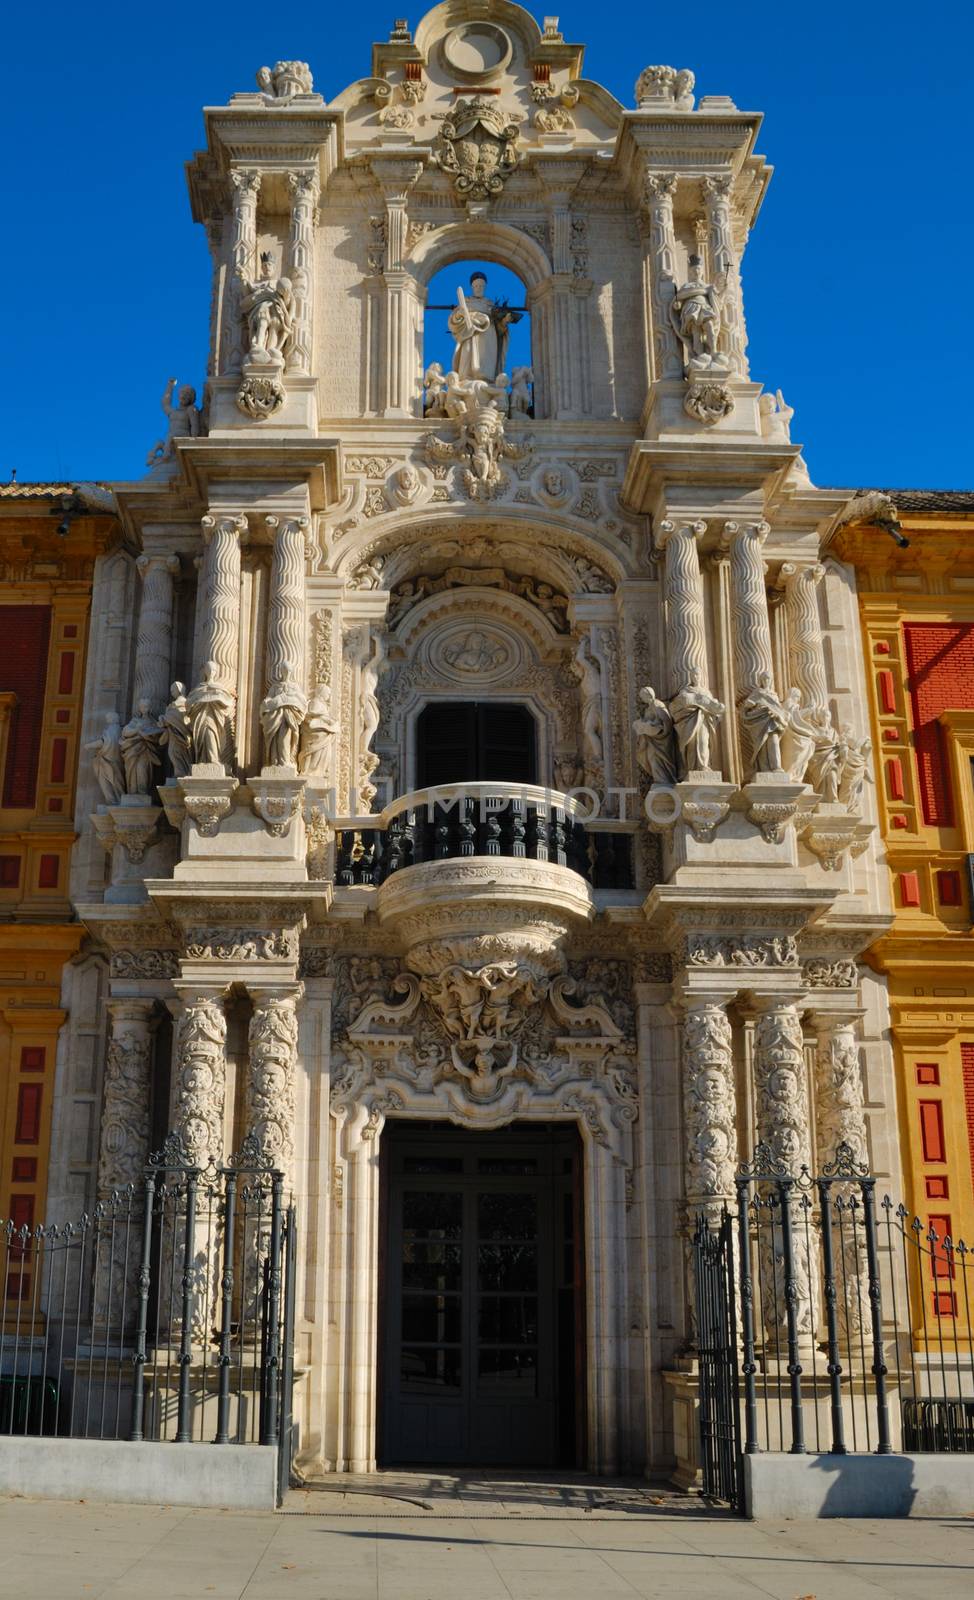 Saint Telmo Palace, Seville, Spain. The palace is one of the emblematic buildings of Sevillian Baroque architecture. 